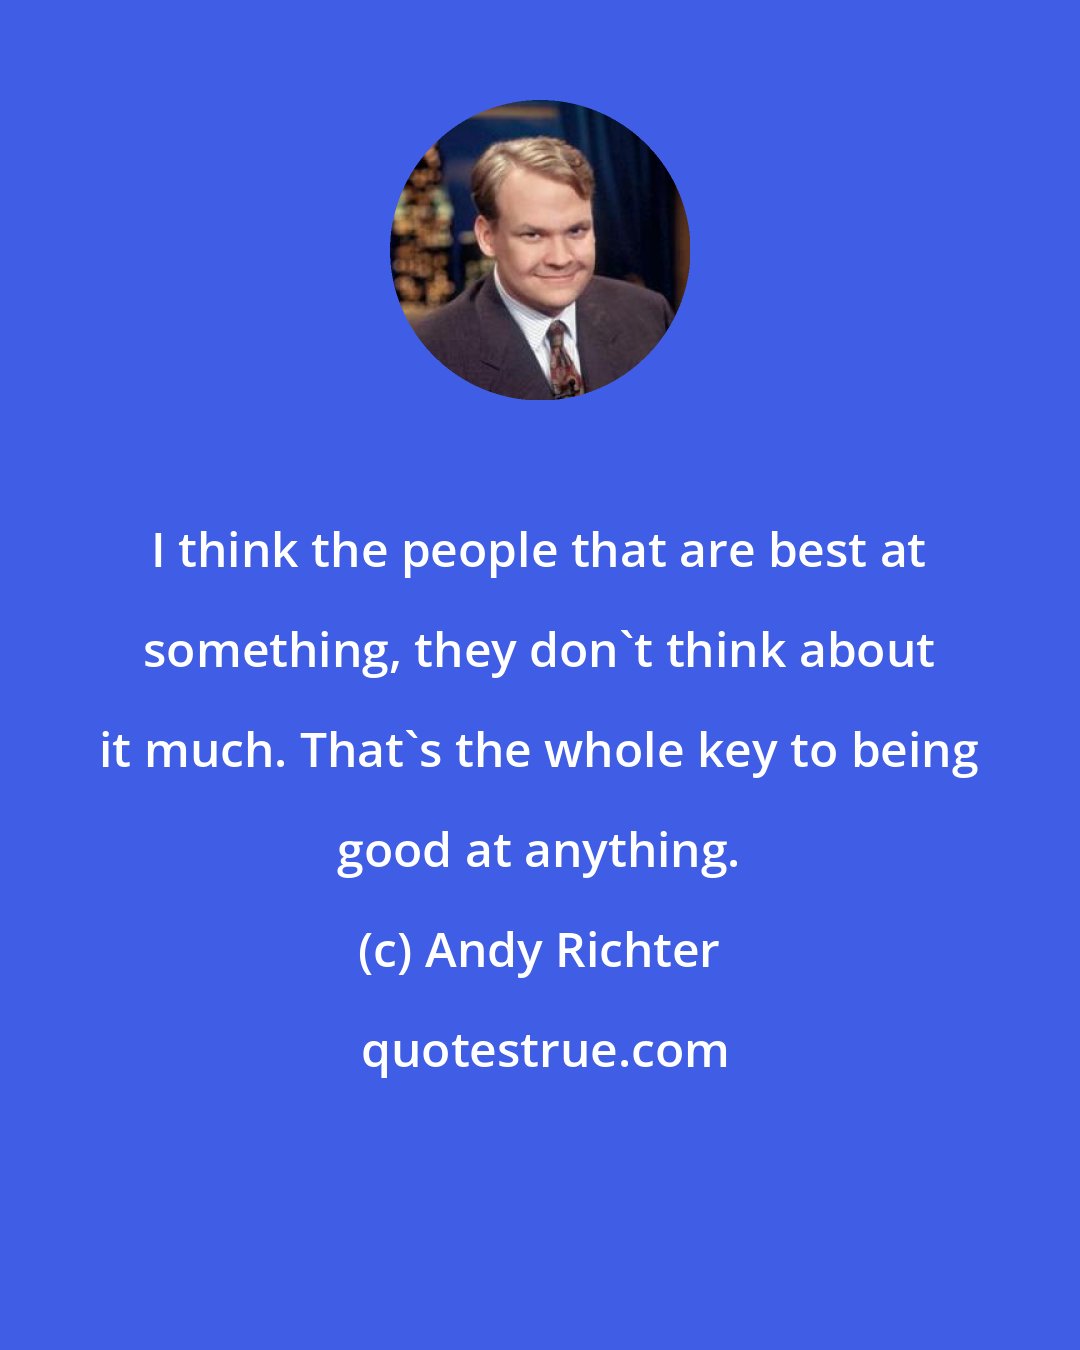 Andy Richter: I think the people that are best at something, they don't think about it much. That's the whole key to being good at anything.